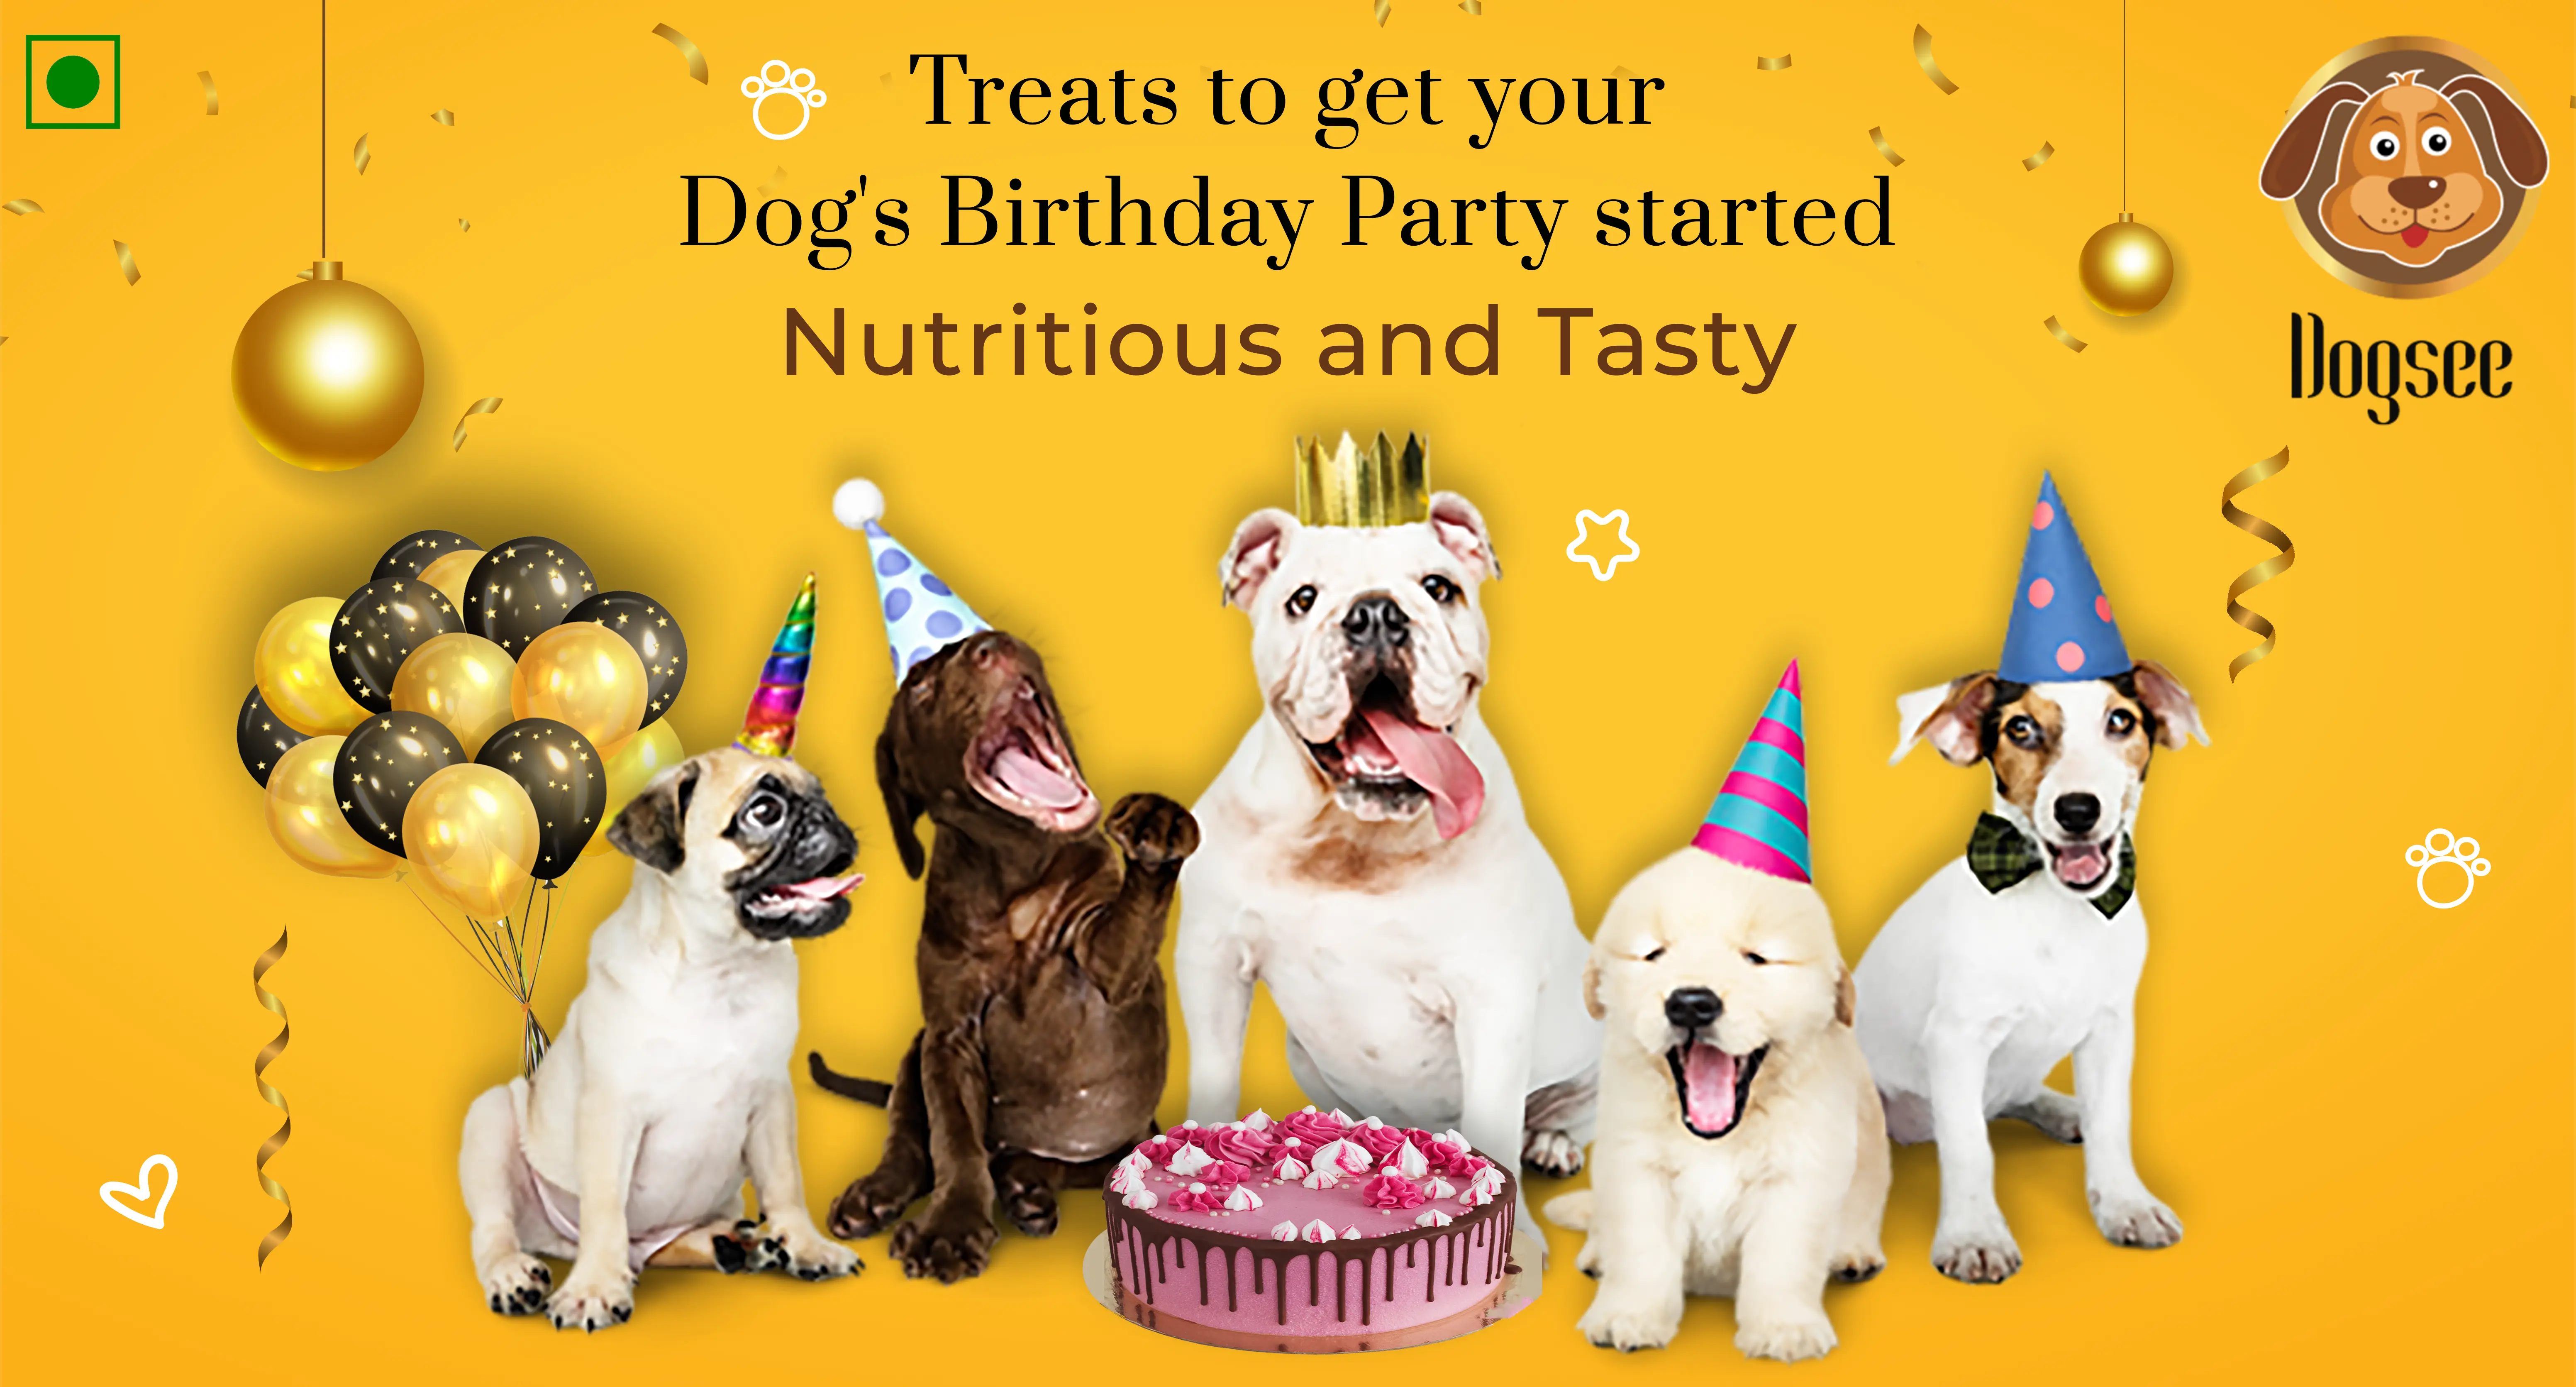 Treats to get your Dog's Birthday Party started